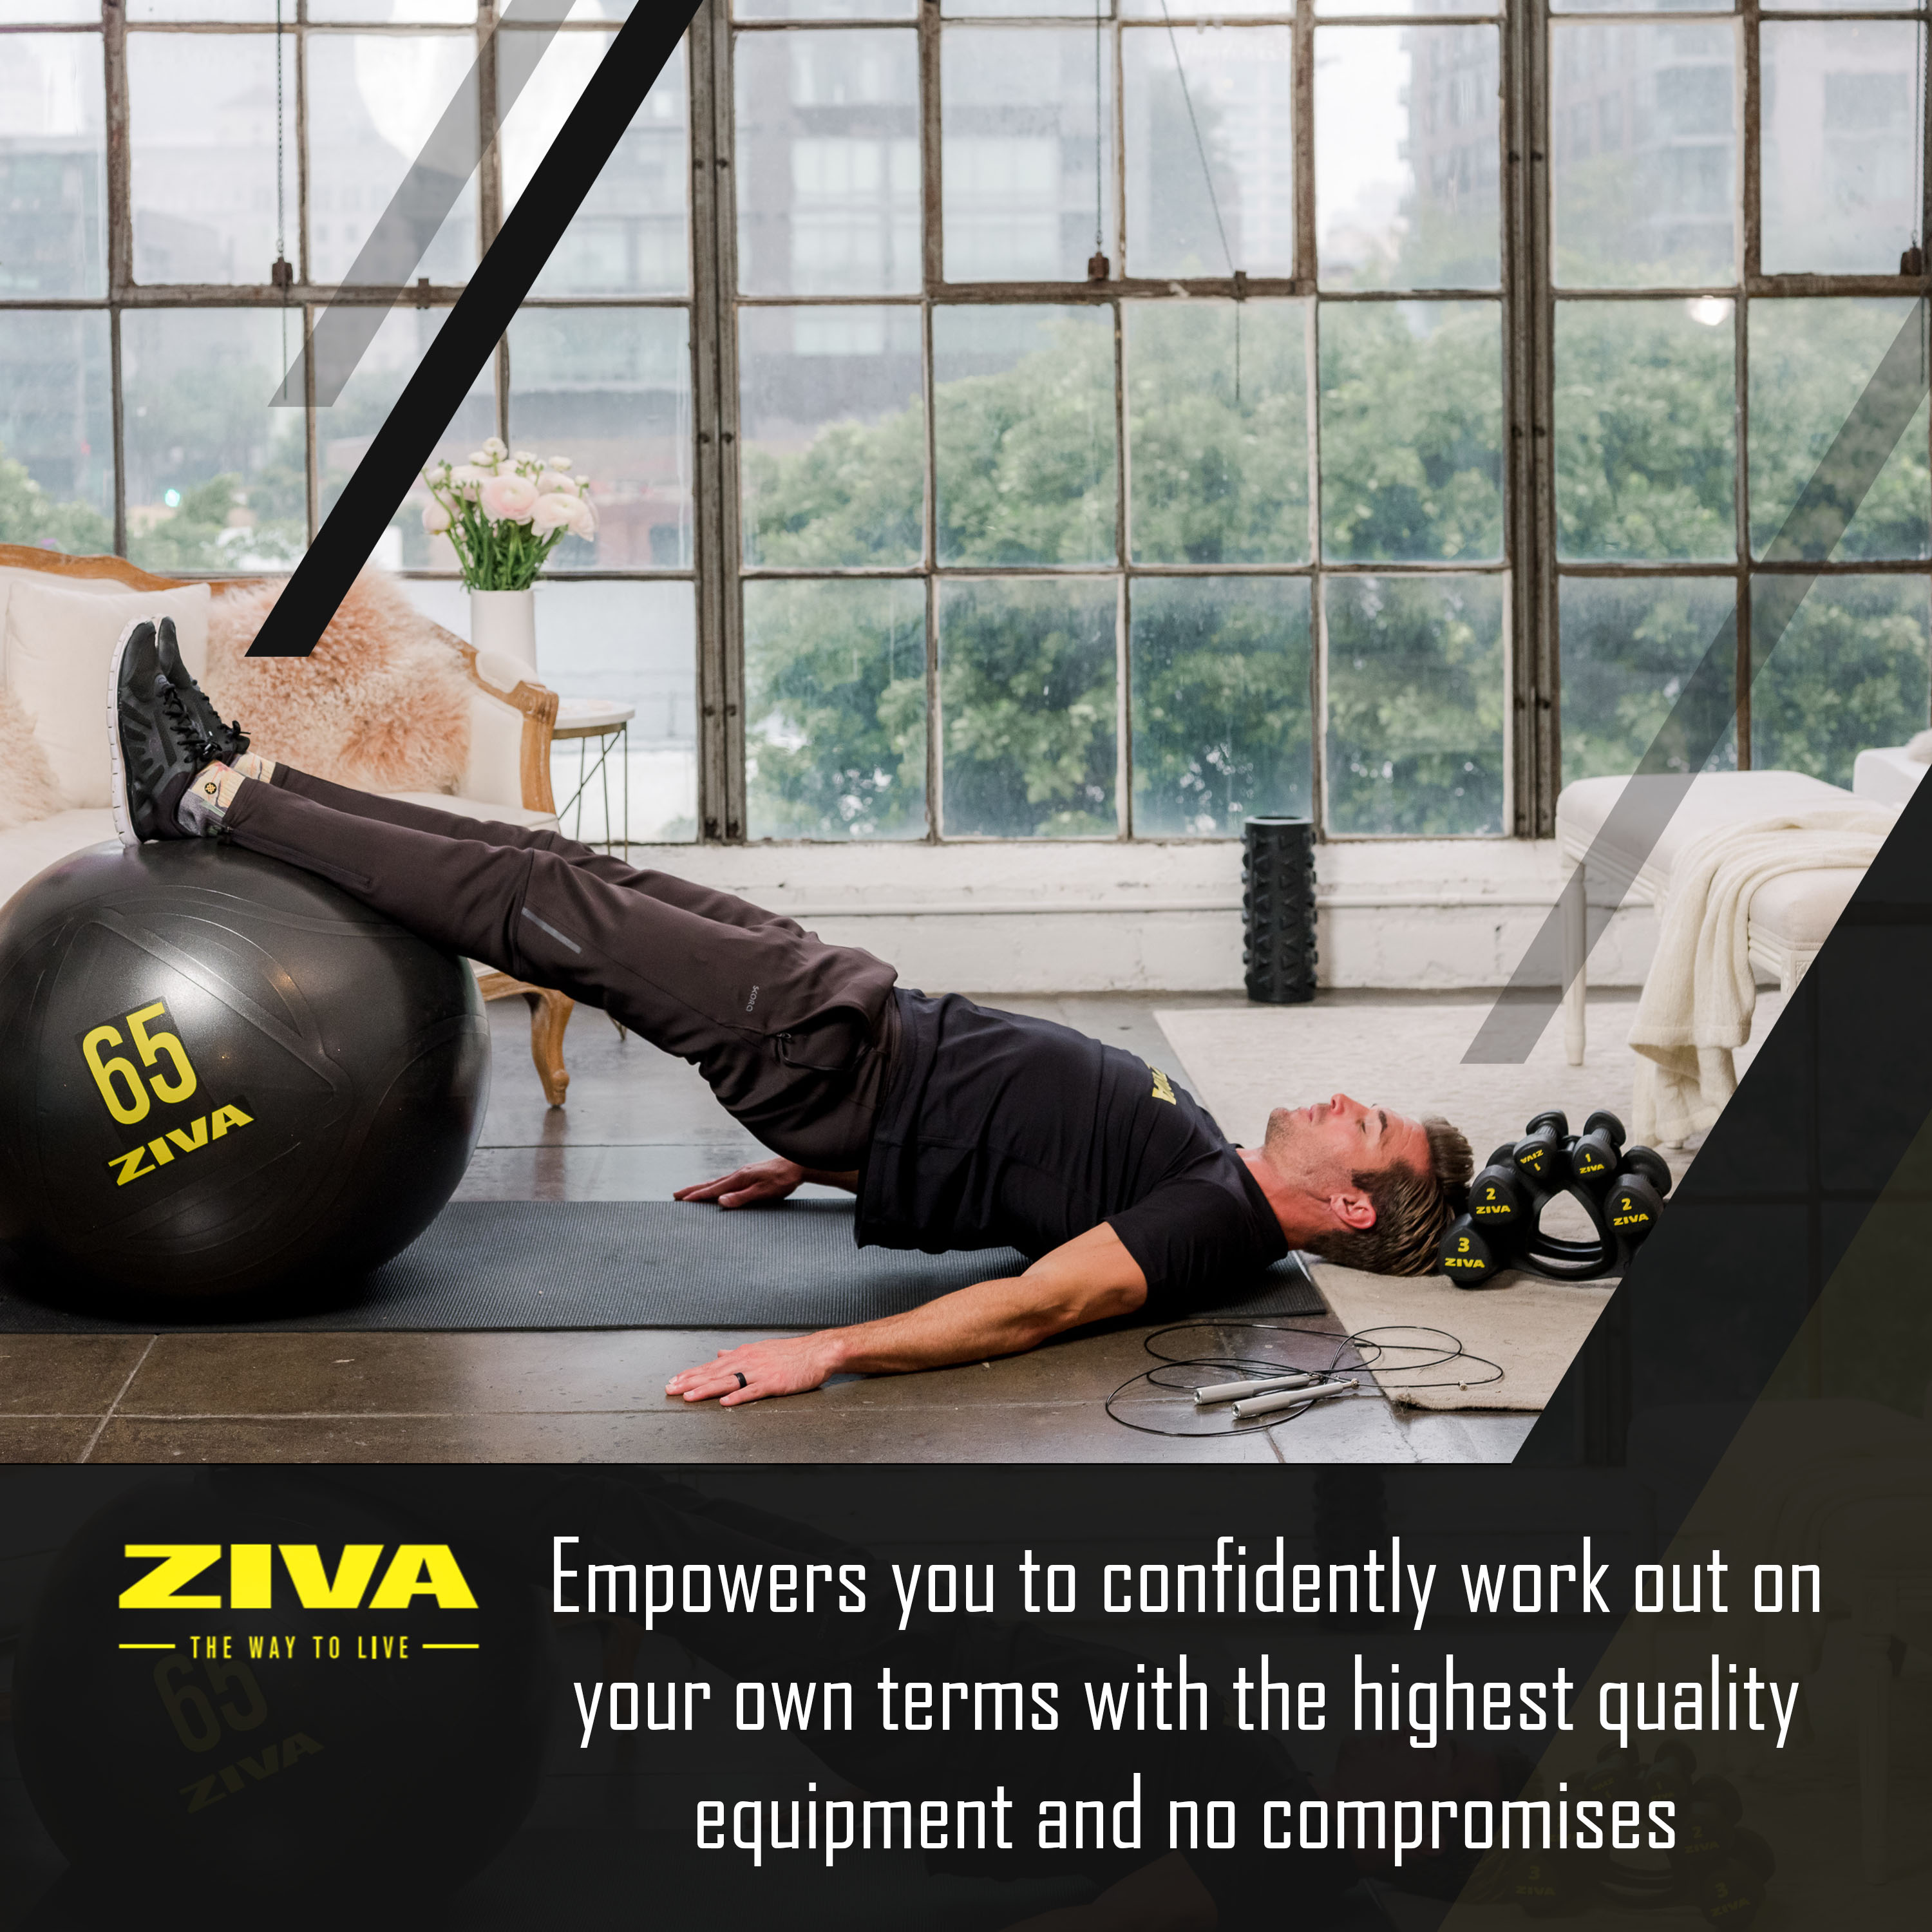 Empowers you to confidently work out on your own terms with the highest quality equipment and no compromises.